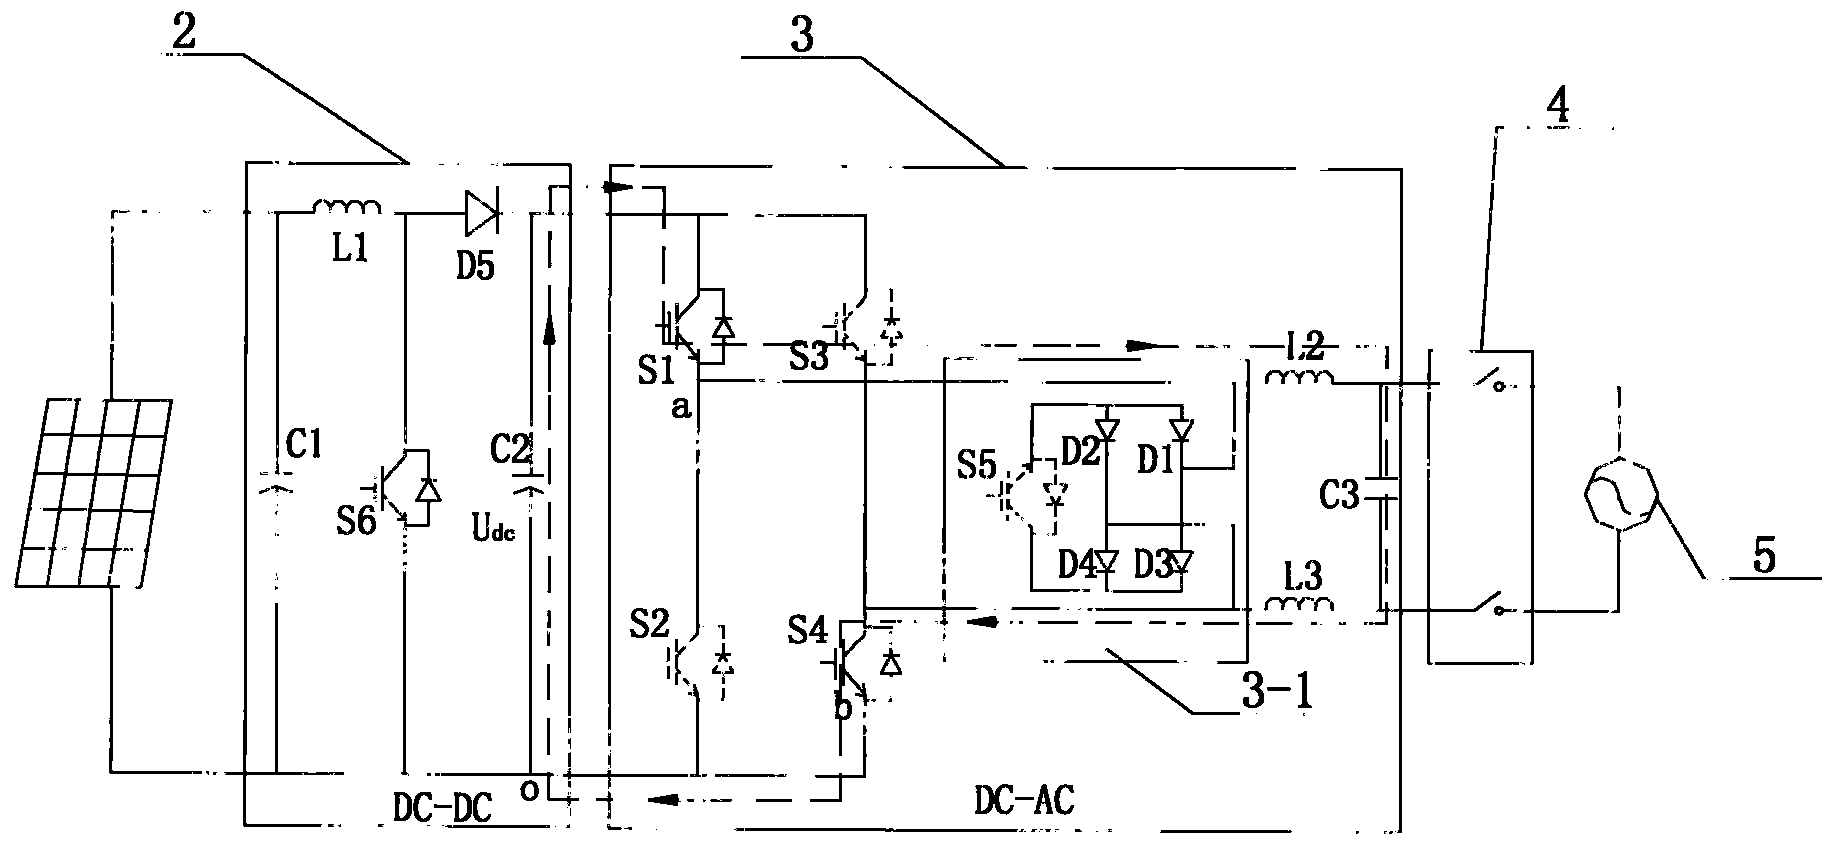 Efficient no-transformer single phase photovoltaic grid-connected inverter